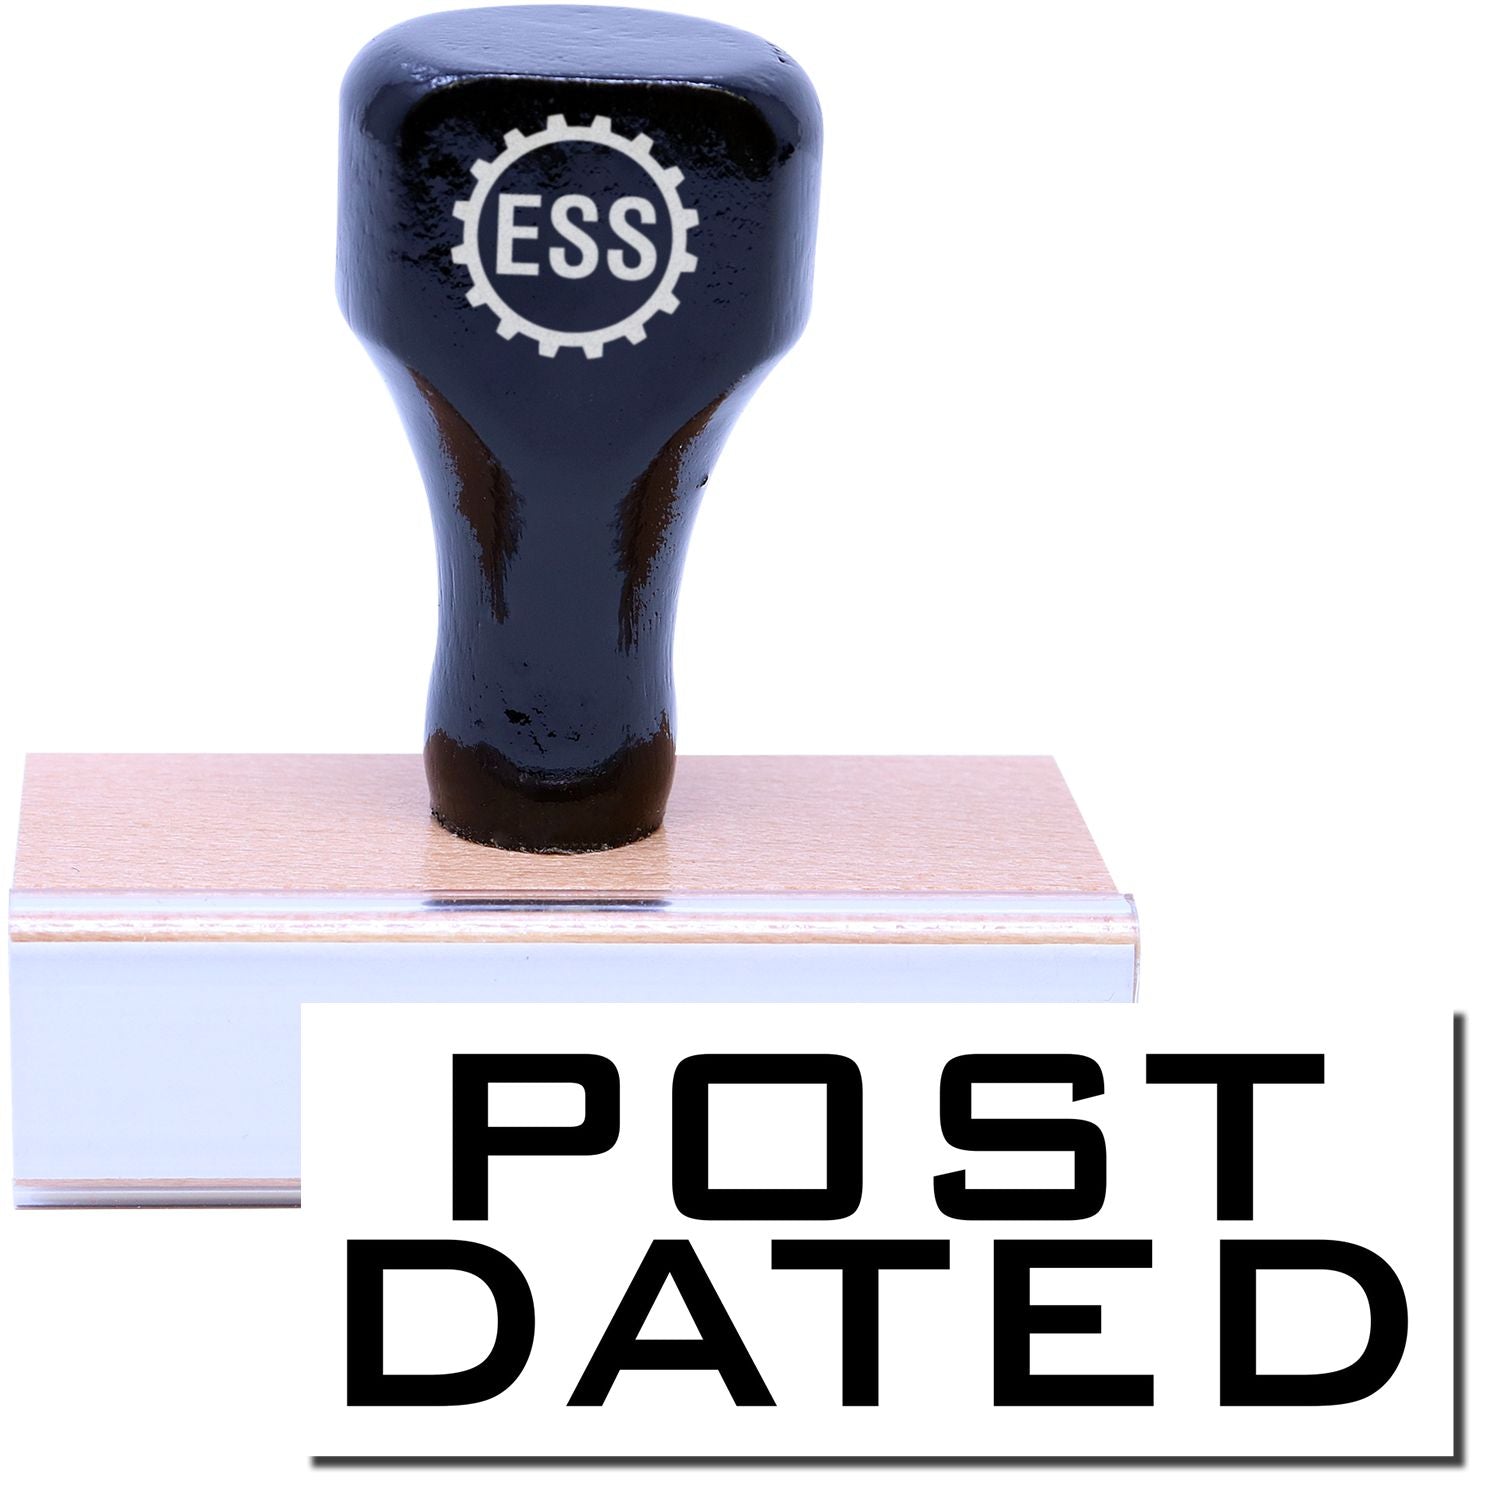 A stock office rubber stamp with a stamped image showing how the text "POST DATED" is displayed after stamping.